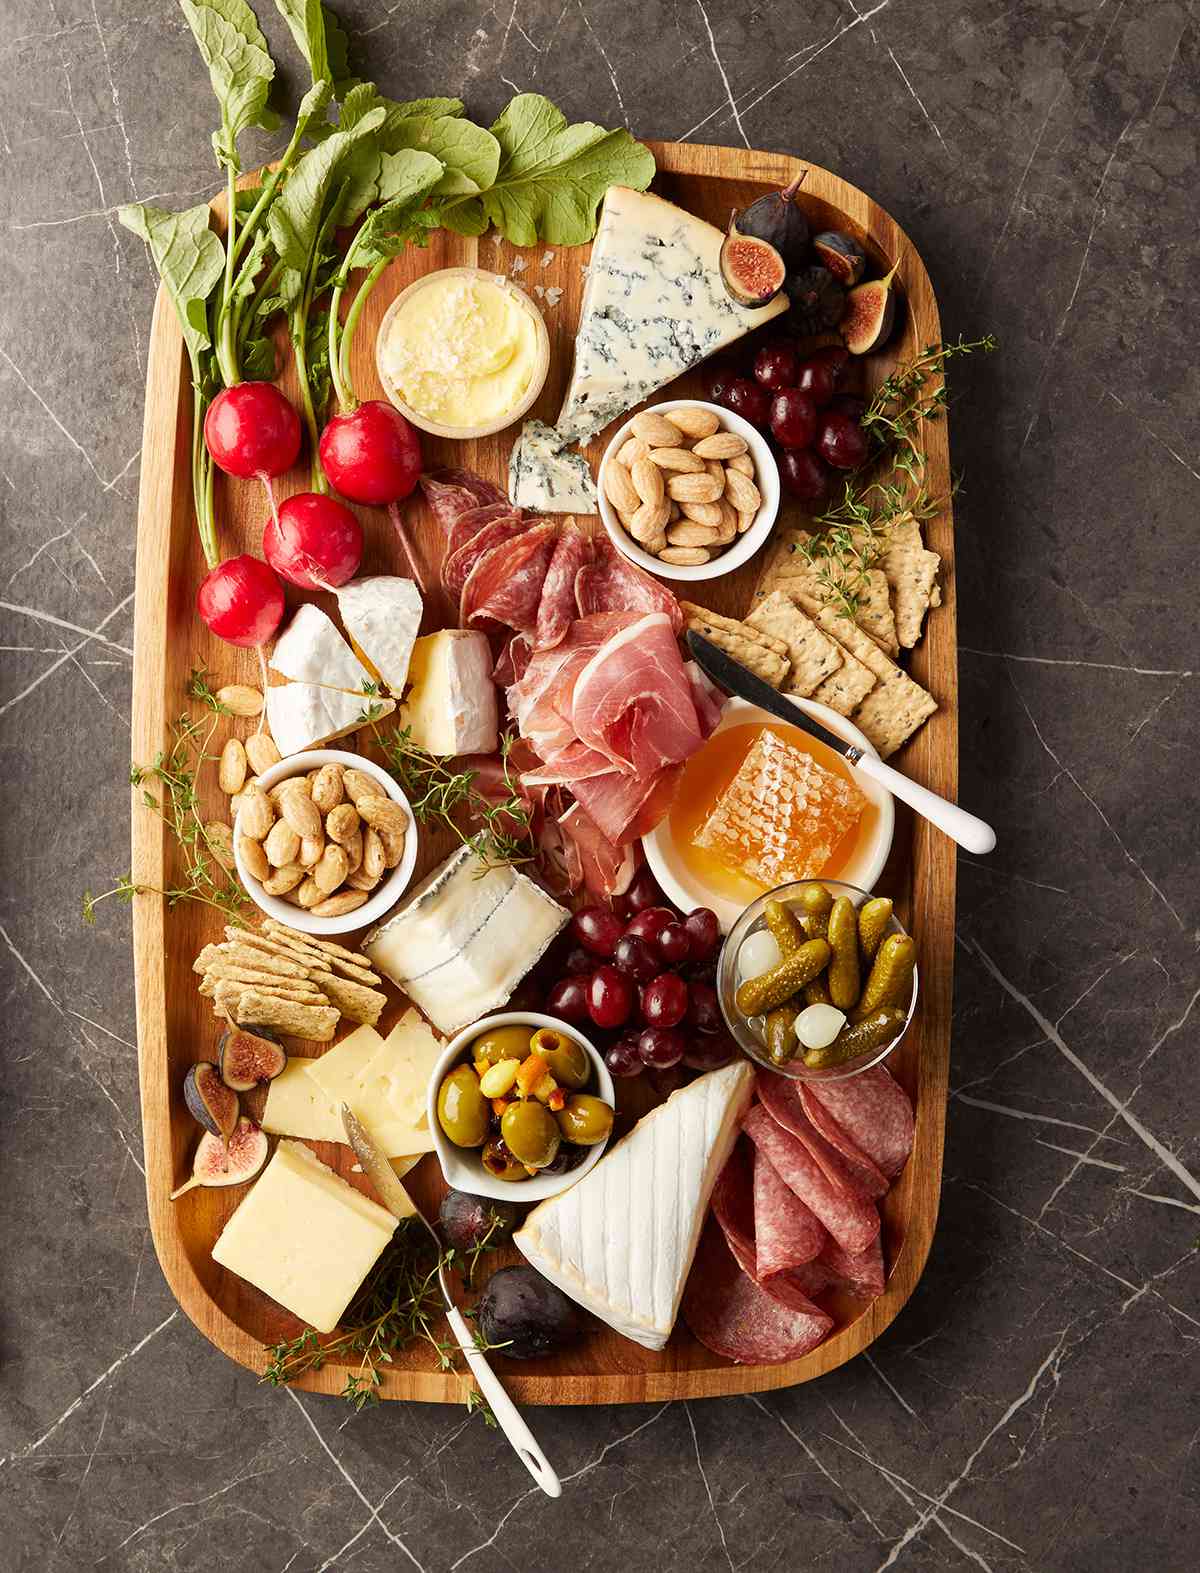 How to Build a Simple Charcuterie Board | Better Homes & Gardens